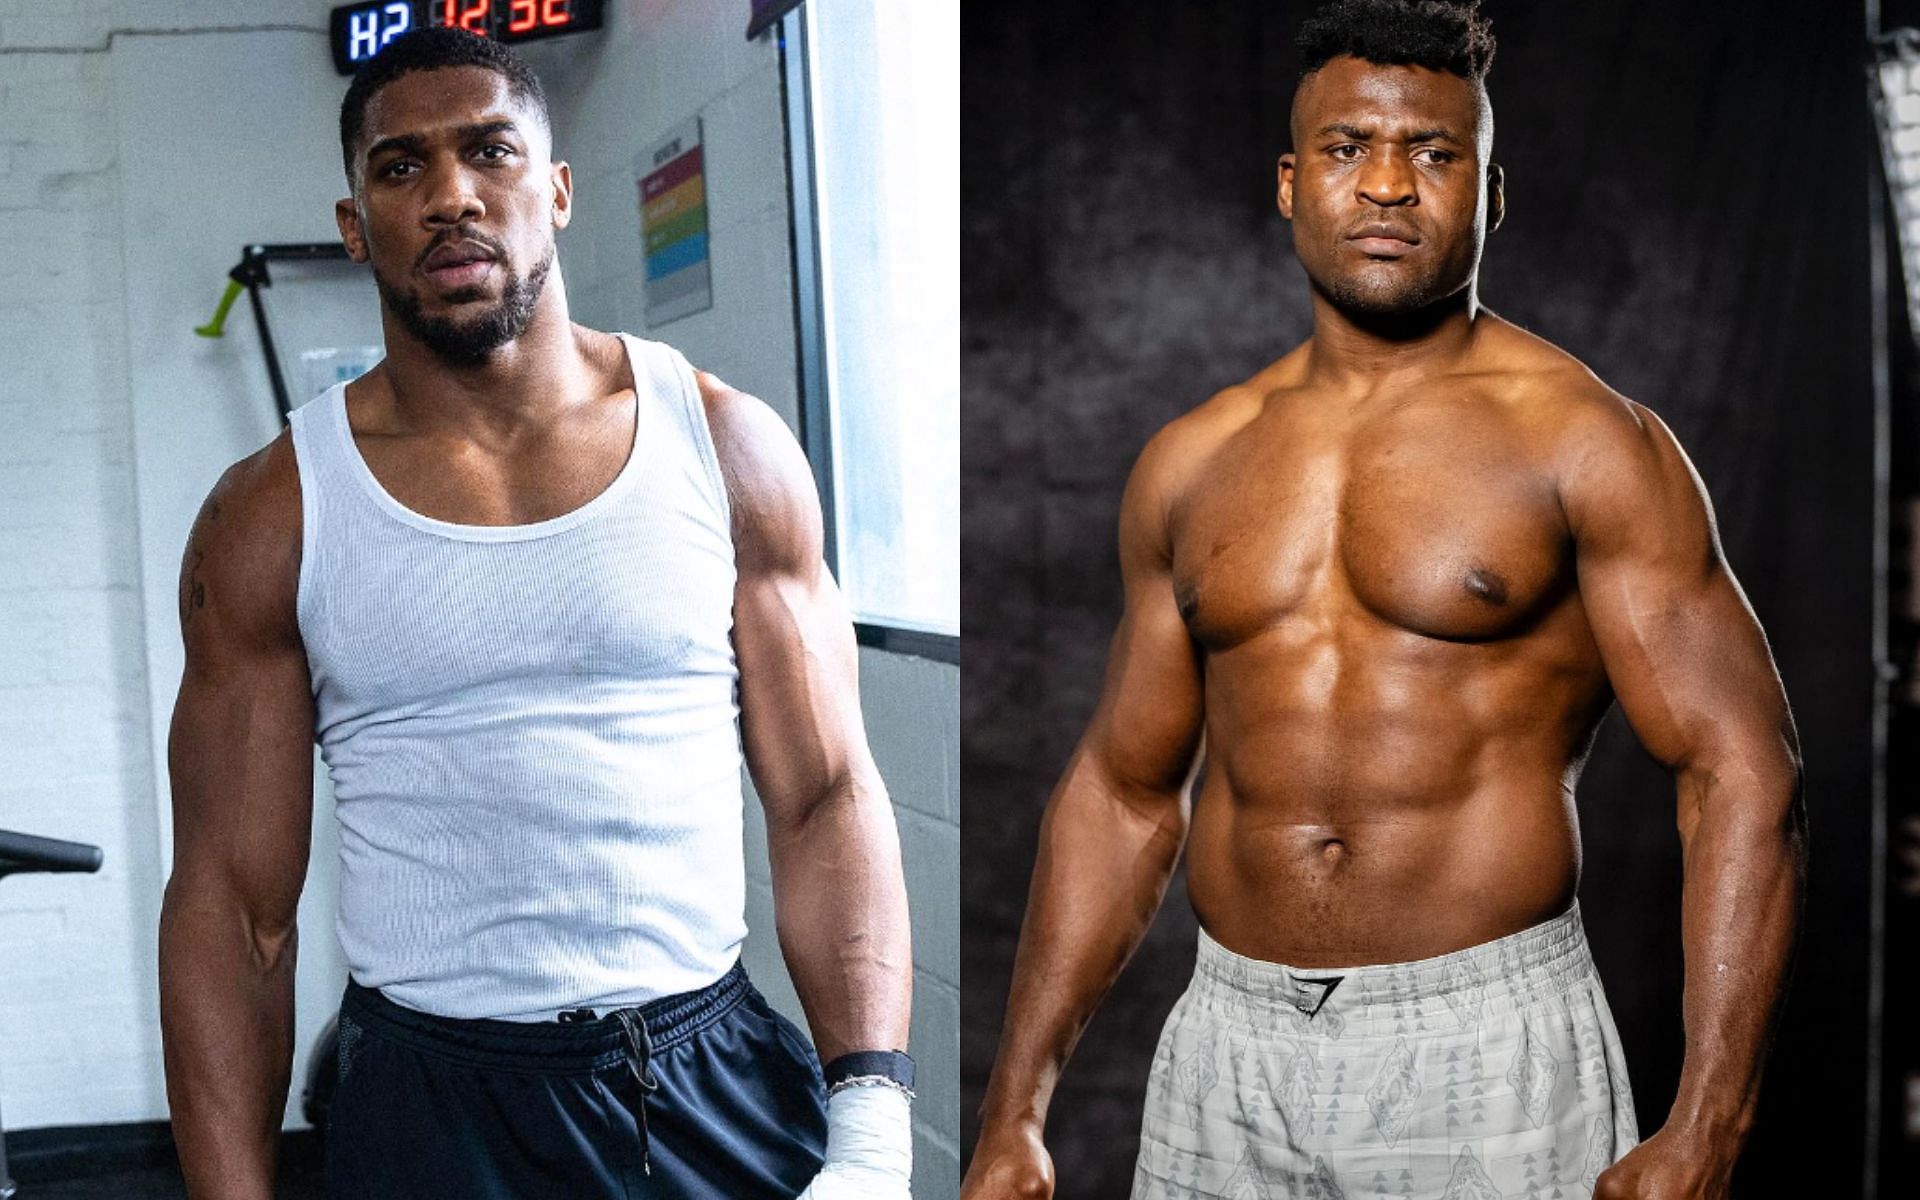 Anthony Joshua (left) vs. Francis Ngannou (right) will more than likely end with a knockout, says Joshua